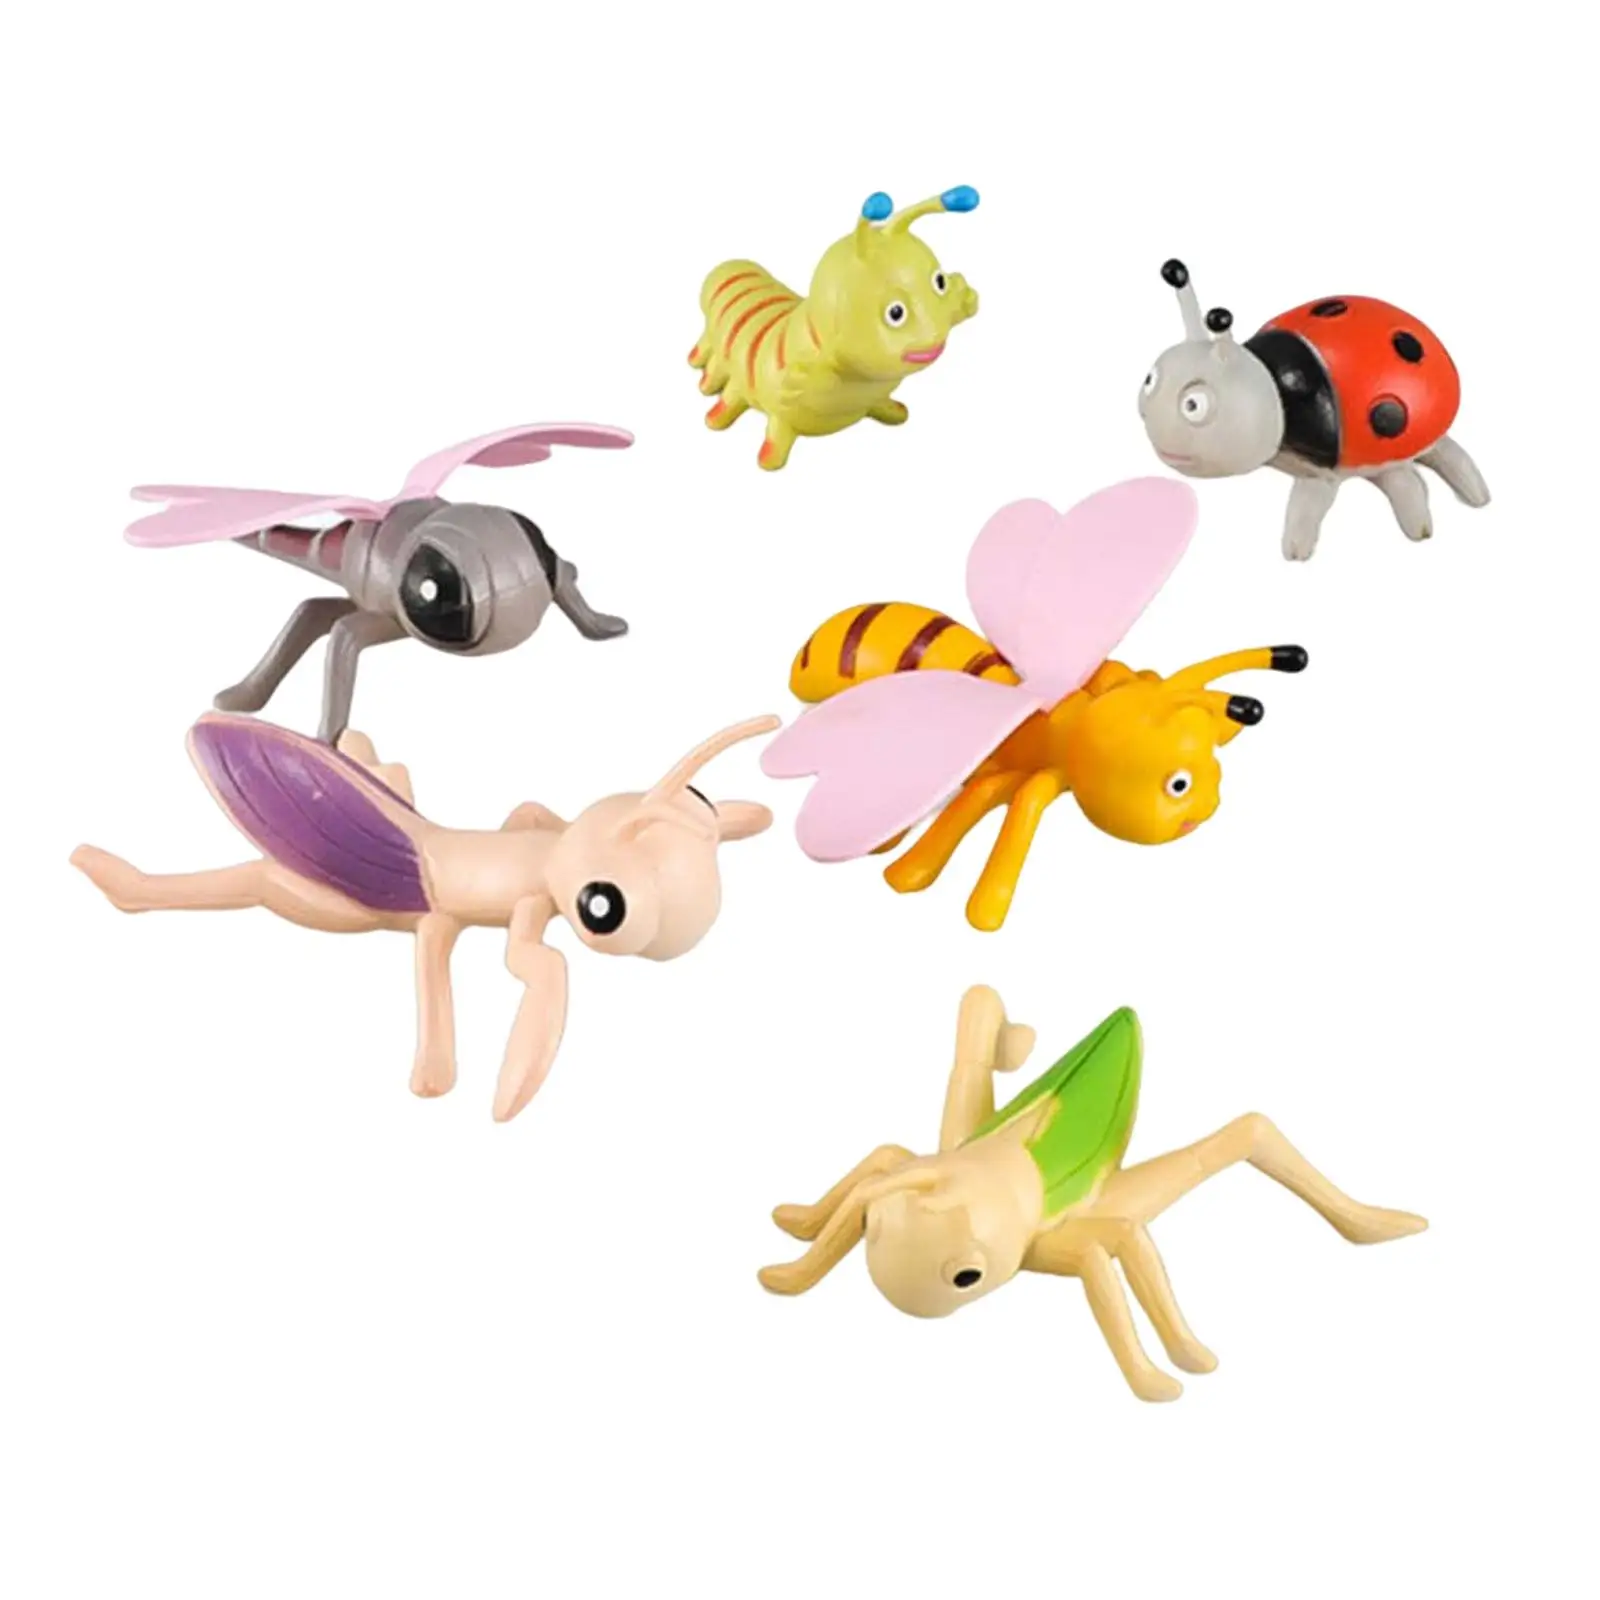 6 Pieces Animals Model Playset Children Toy Simulation Halloween Prop Birthday Gift Theme Party Tabletop Decors Party Tricks Toy